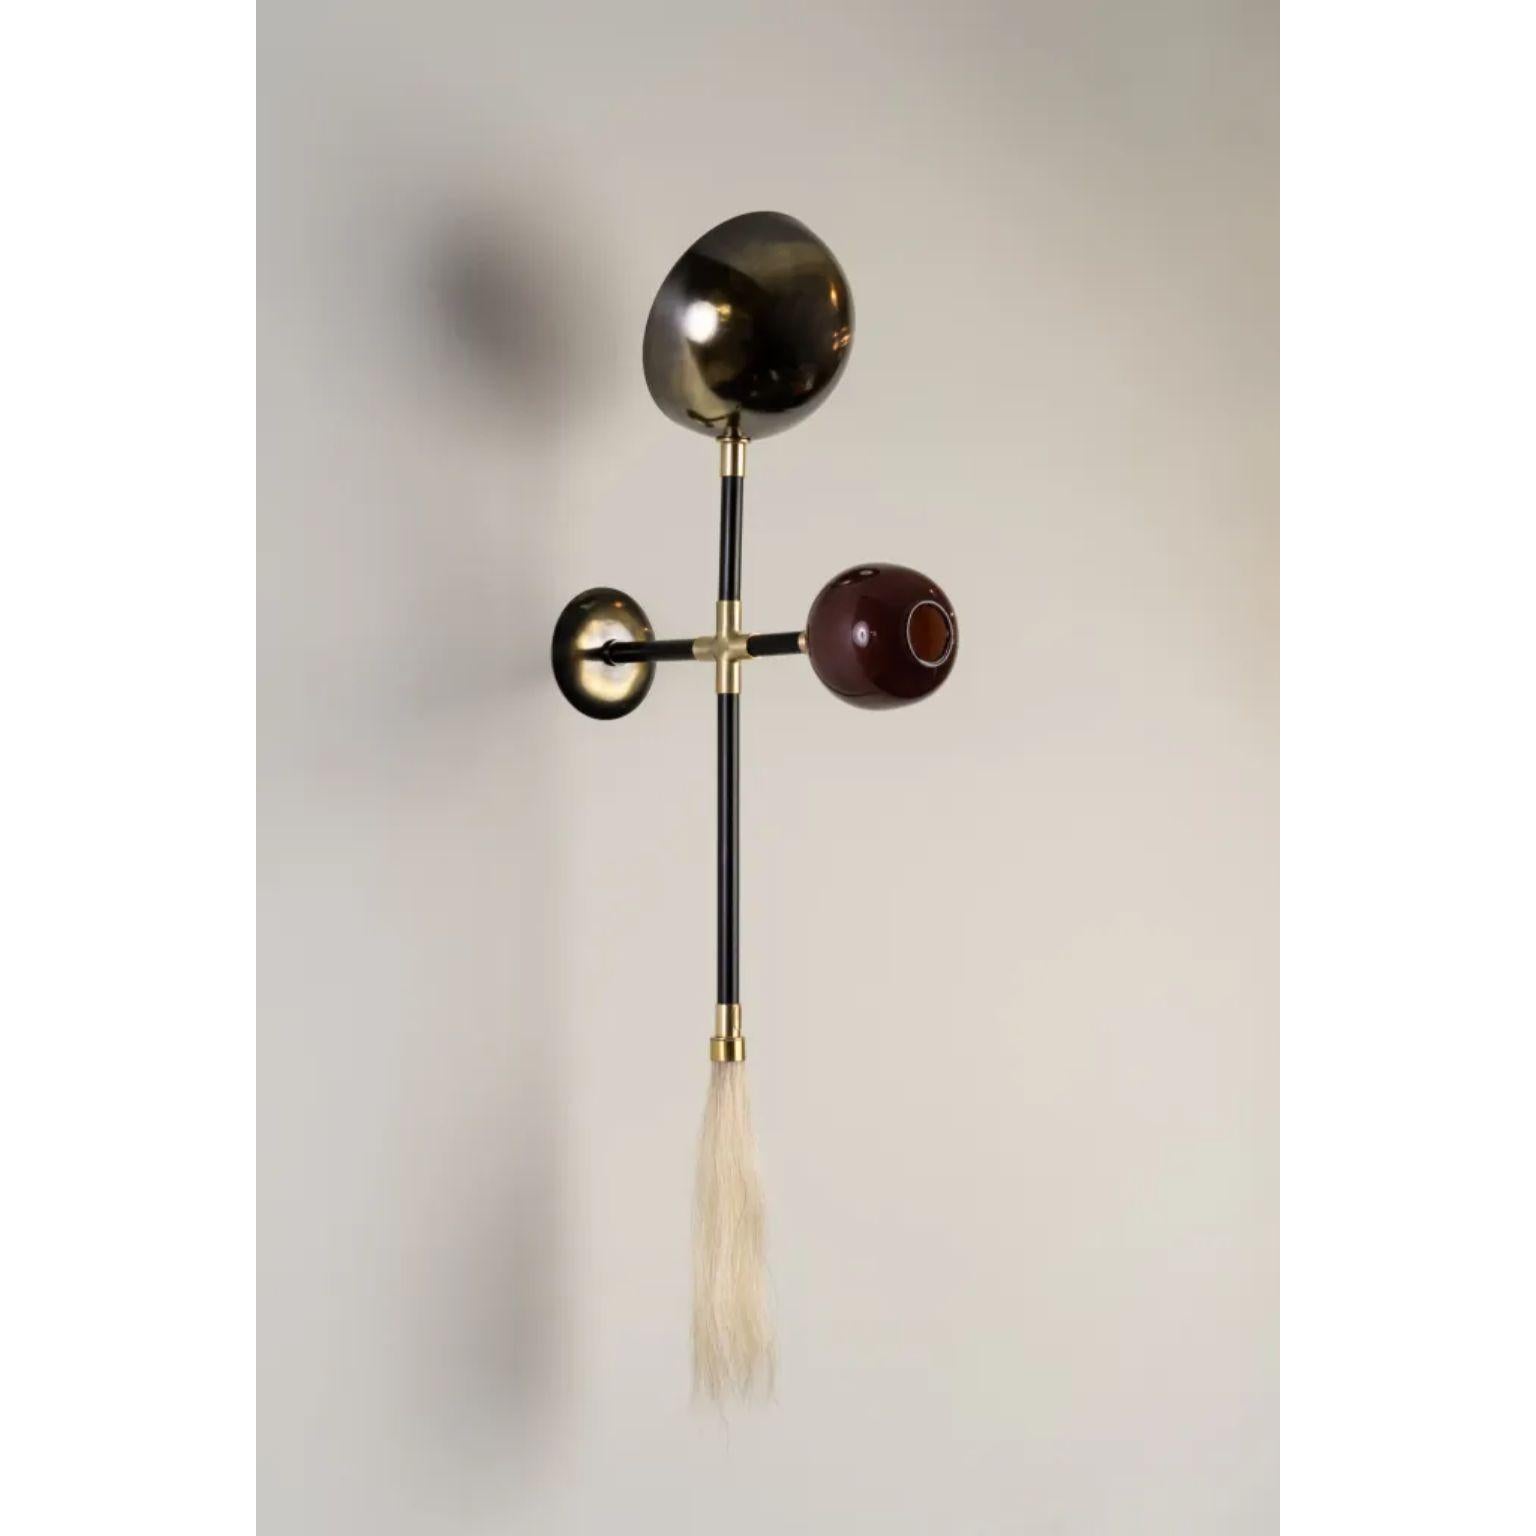 Gogo Aubergine Wall Lamp by Isabel Moncada
Dimensions: D 21 x W 40 x H 95 cm.
Materials: Brass with black finish and polished brass, blown glass globe and horsehair tassel.

Go-go, a term used in the 60’s to describe a frantic, pulsating expression